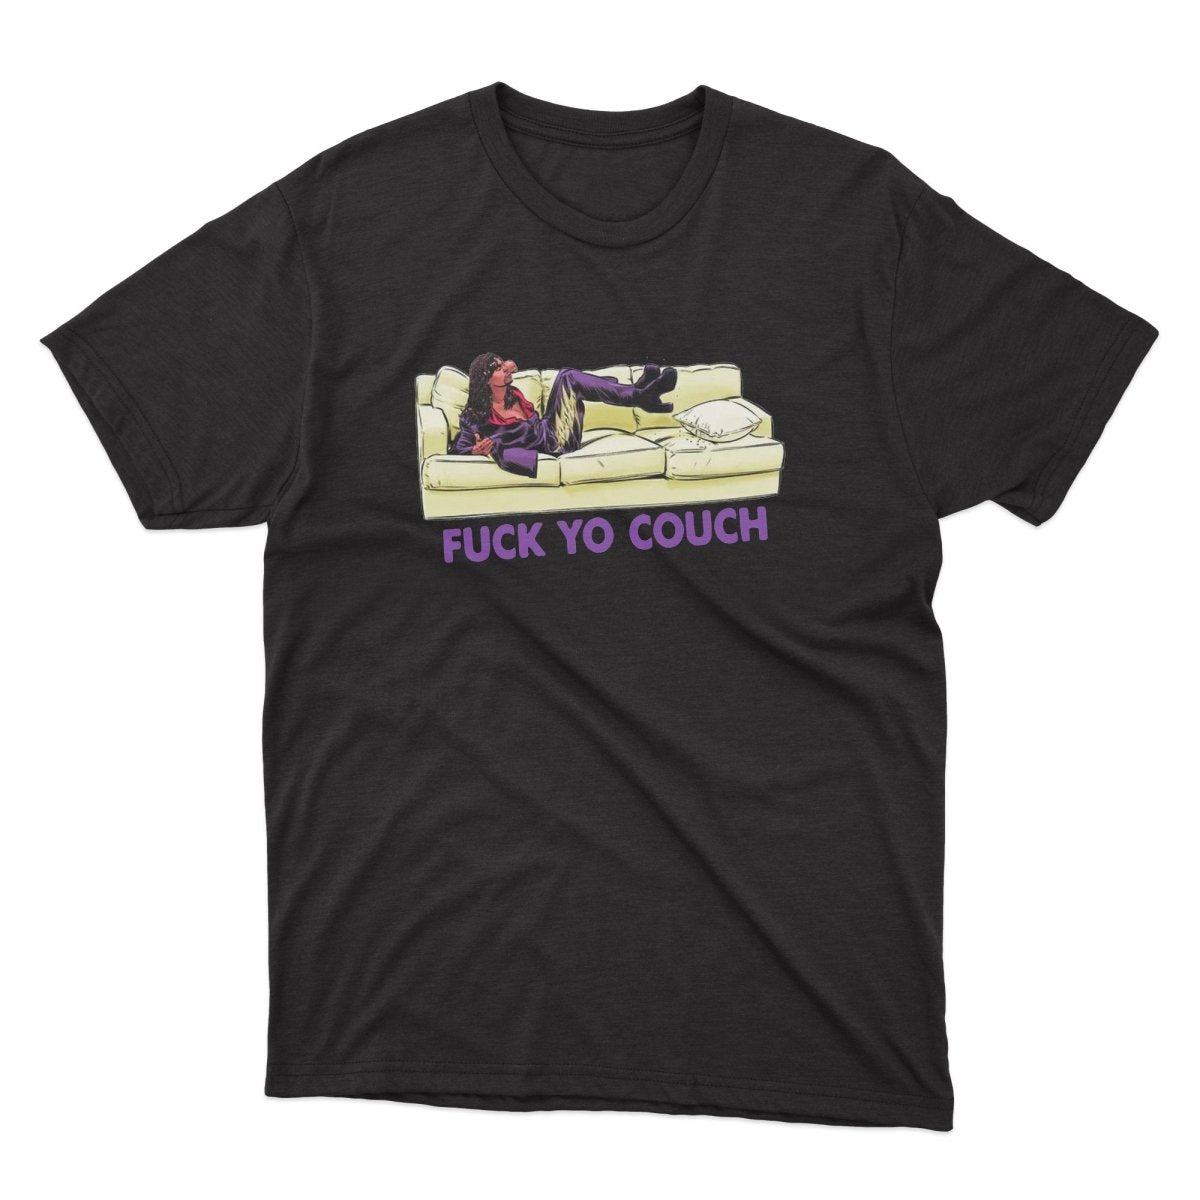 Dave Chappelle Fuck Yo Couch Shirt - stickerbullDave Chappelle Fuck Yo Couch ShirtShirtsPrintifystickerbull60904918617901751343BlackSa black t - shirt with a picture of a woman laying on a couch